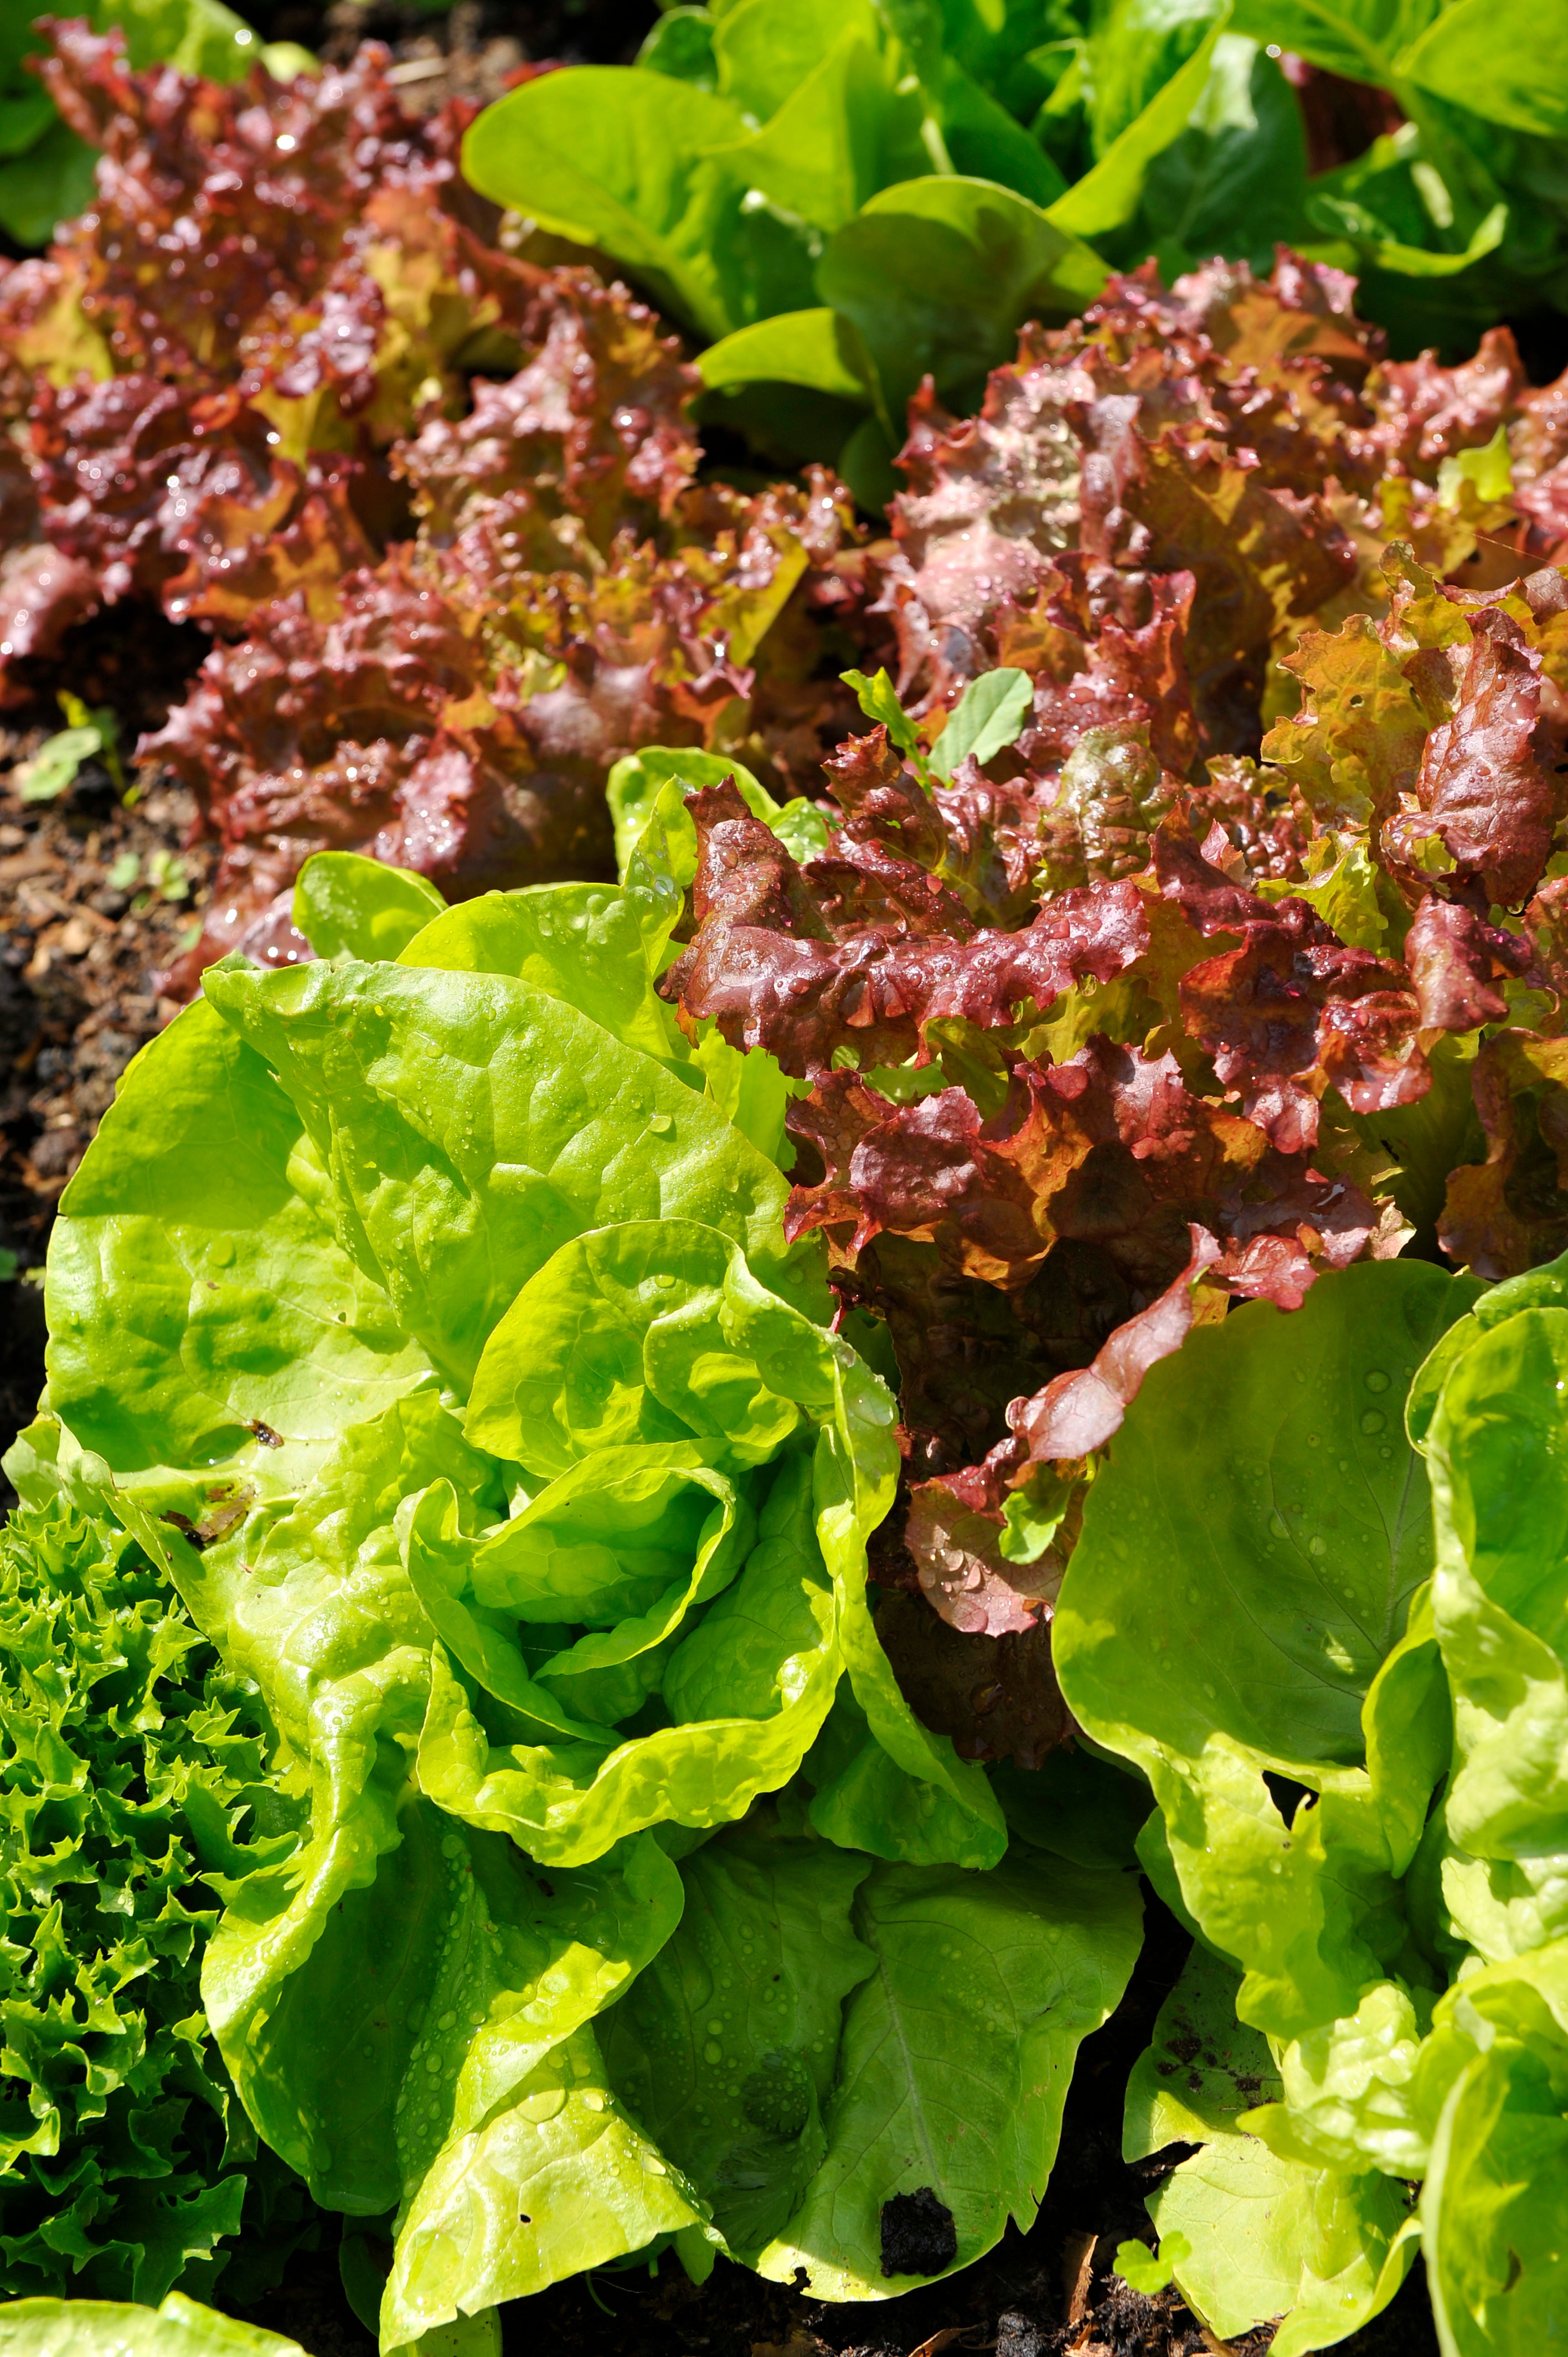 Lettuce is suspected to be the source of the outbreak (PA)